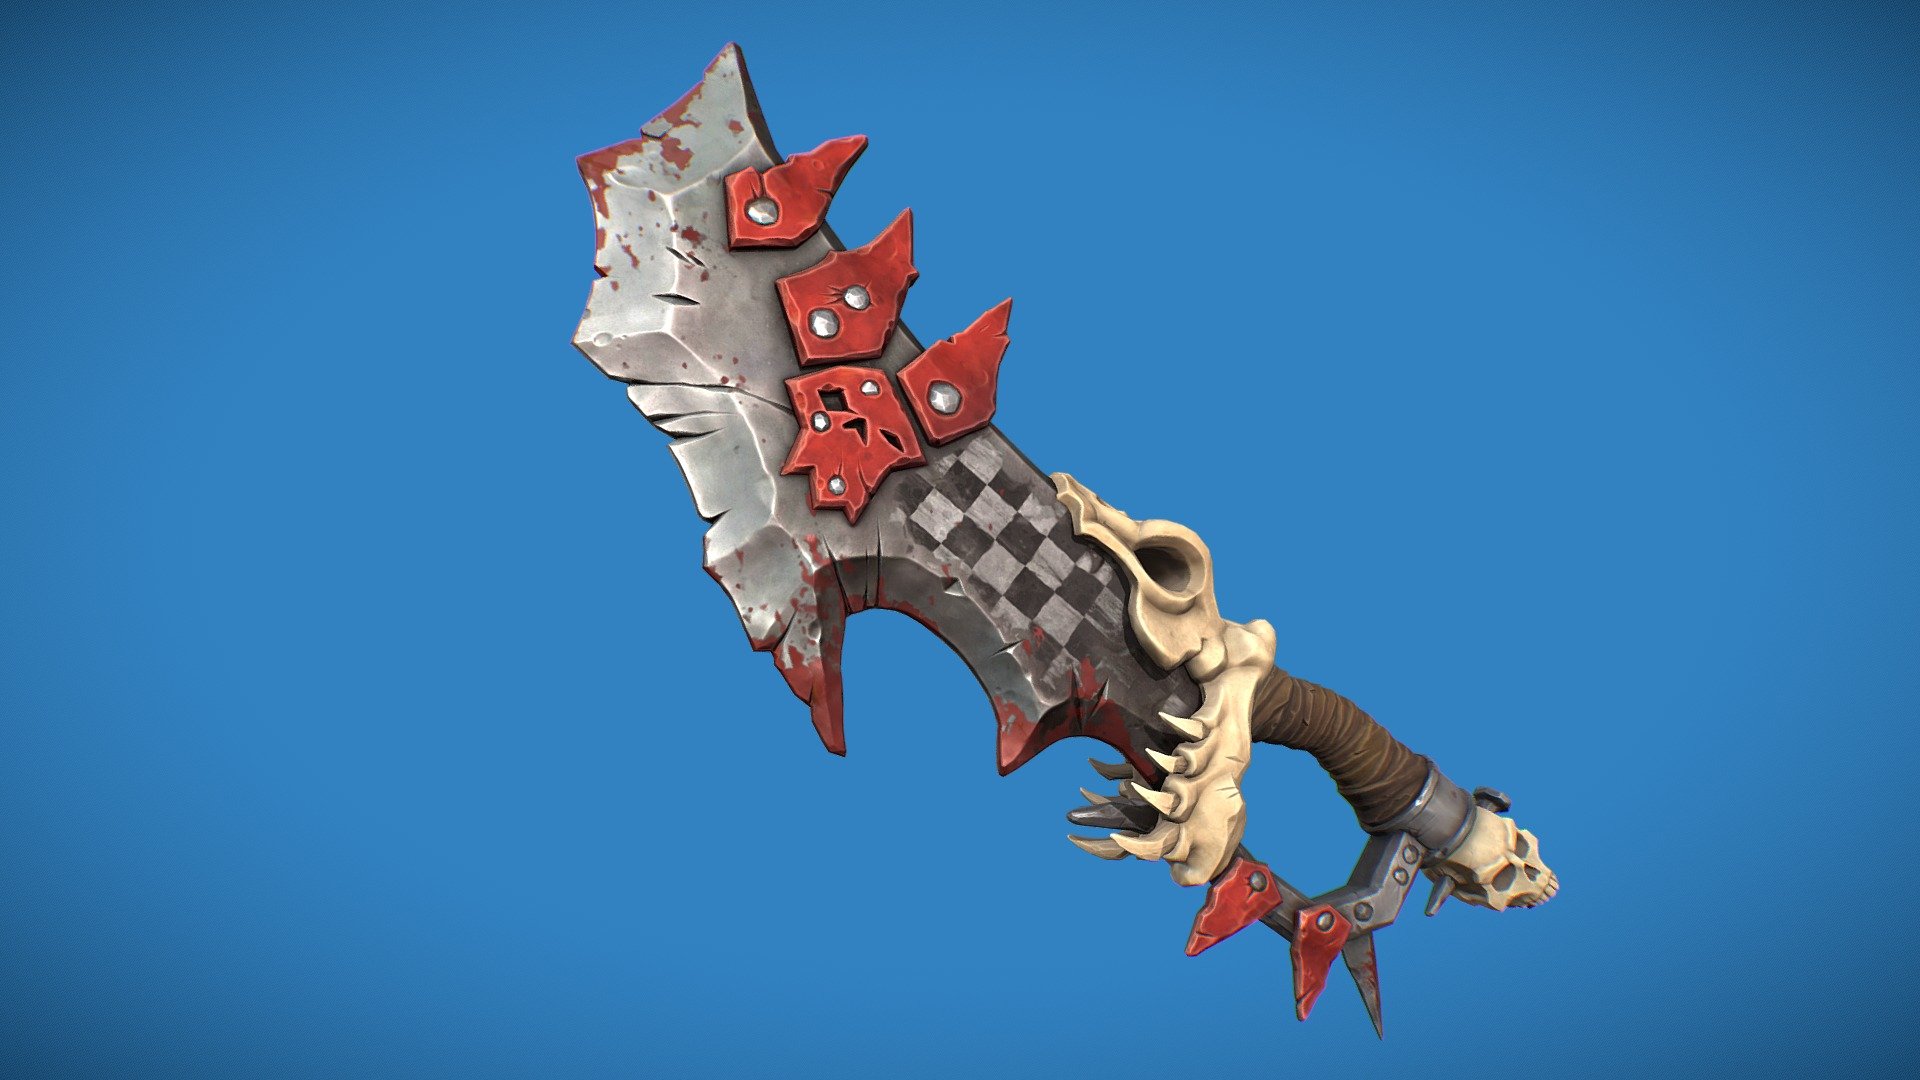 WAAAAGH!
I wanted to make some crazy orkish weapon from warhammer so I mixed some references. This is made with blender, zbrush, and substance painter.

You can see the beauty shots and breakdowns on artstation https://www.artstation.com/artwork/9EzRZN

stats
4415 verts
8302 tris
2k texture - Ork Sword Warhammer - 3D model by Jakub Nedza (@Biddha) 3d model